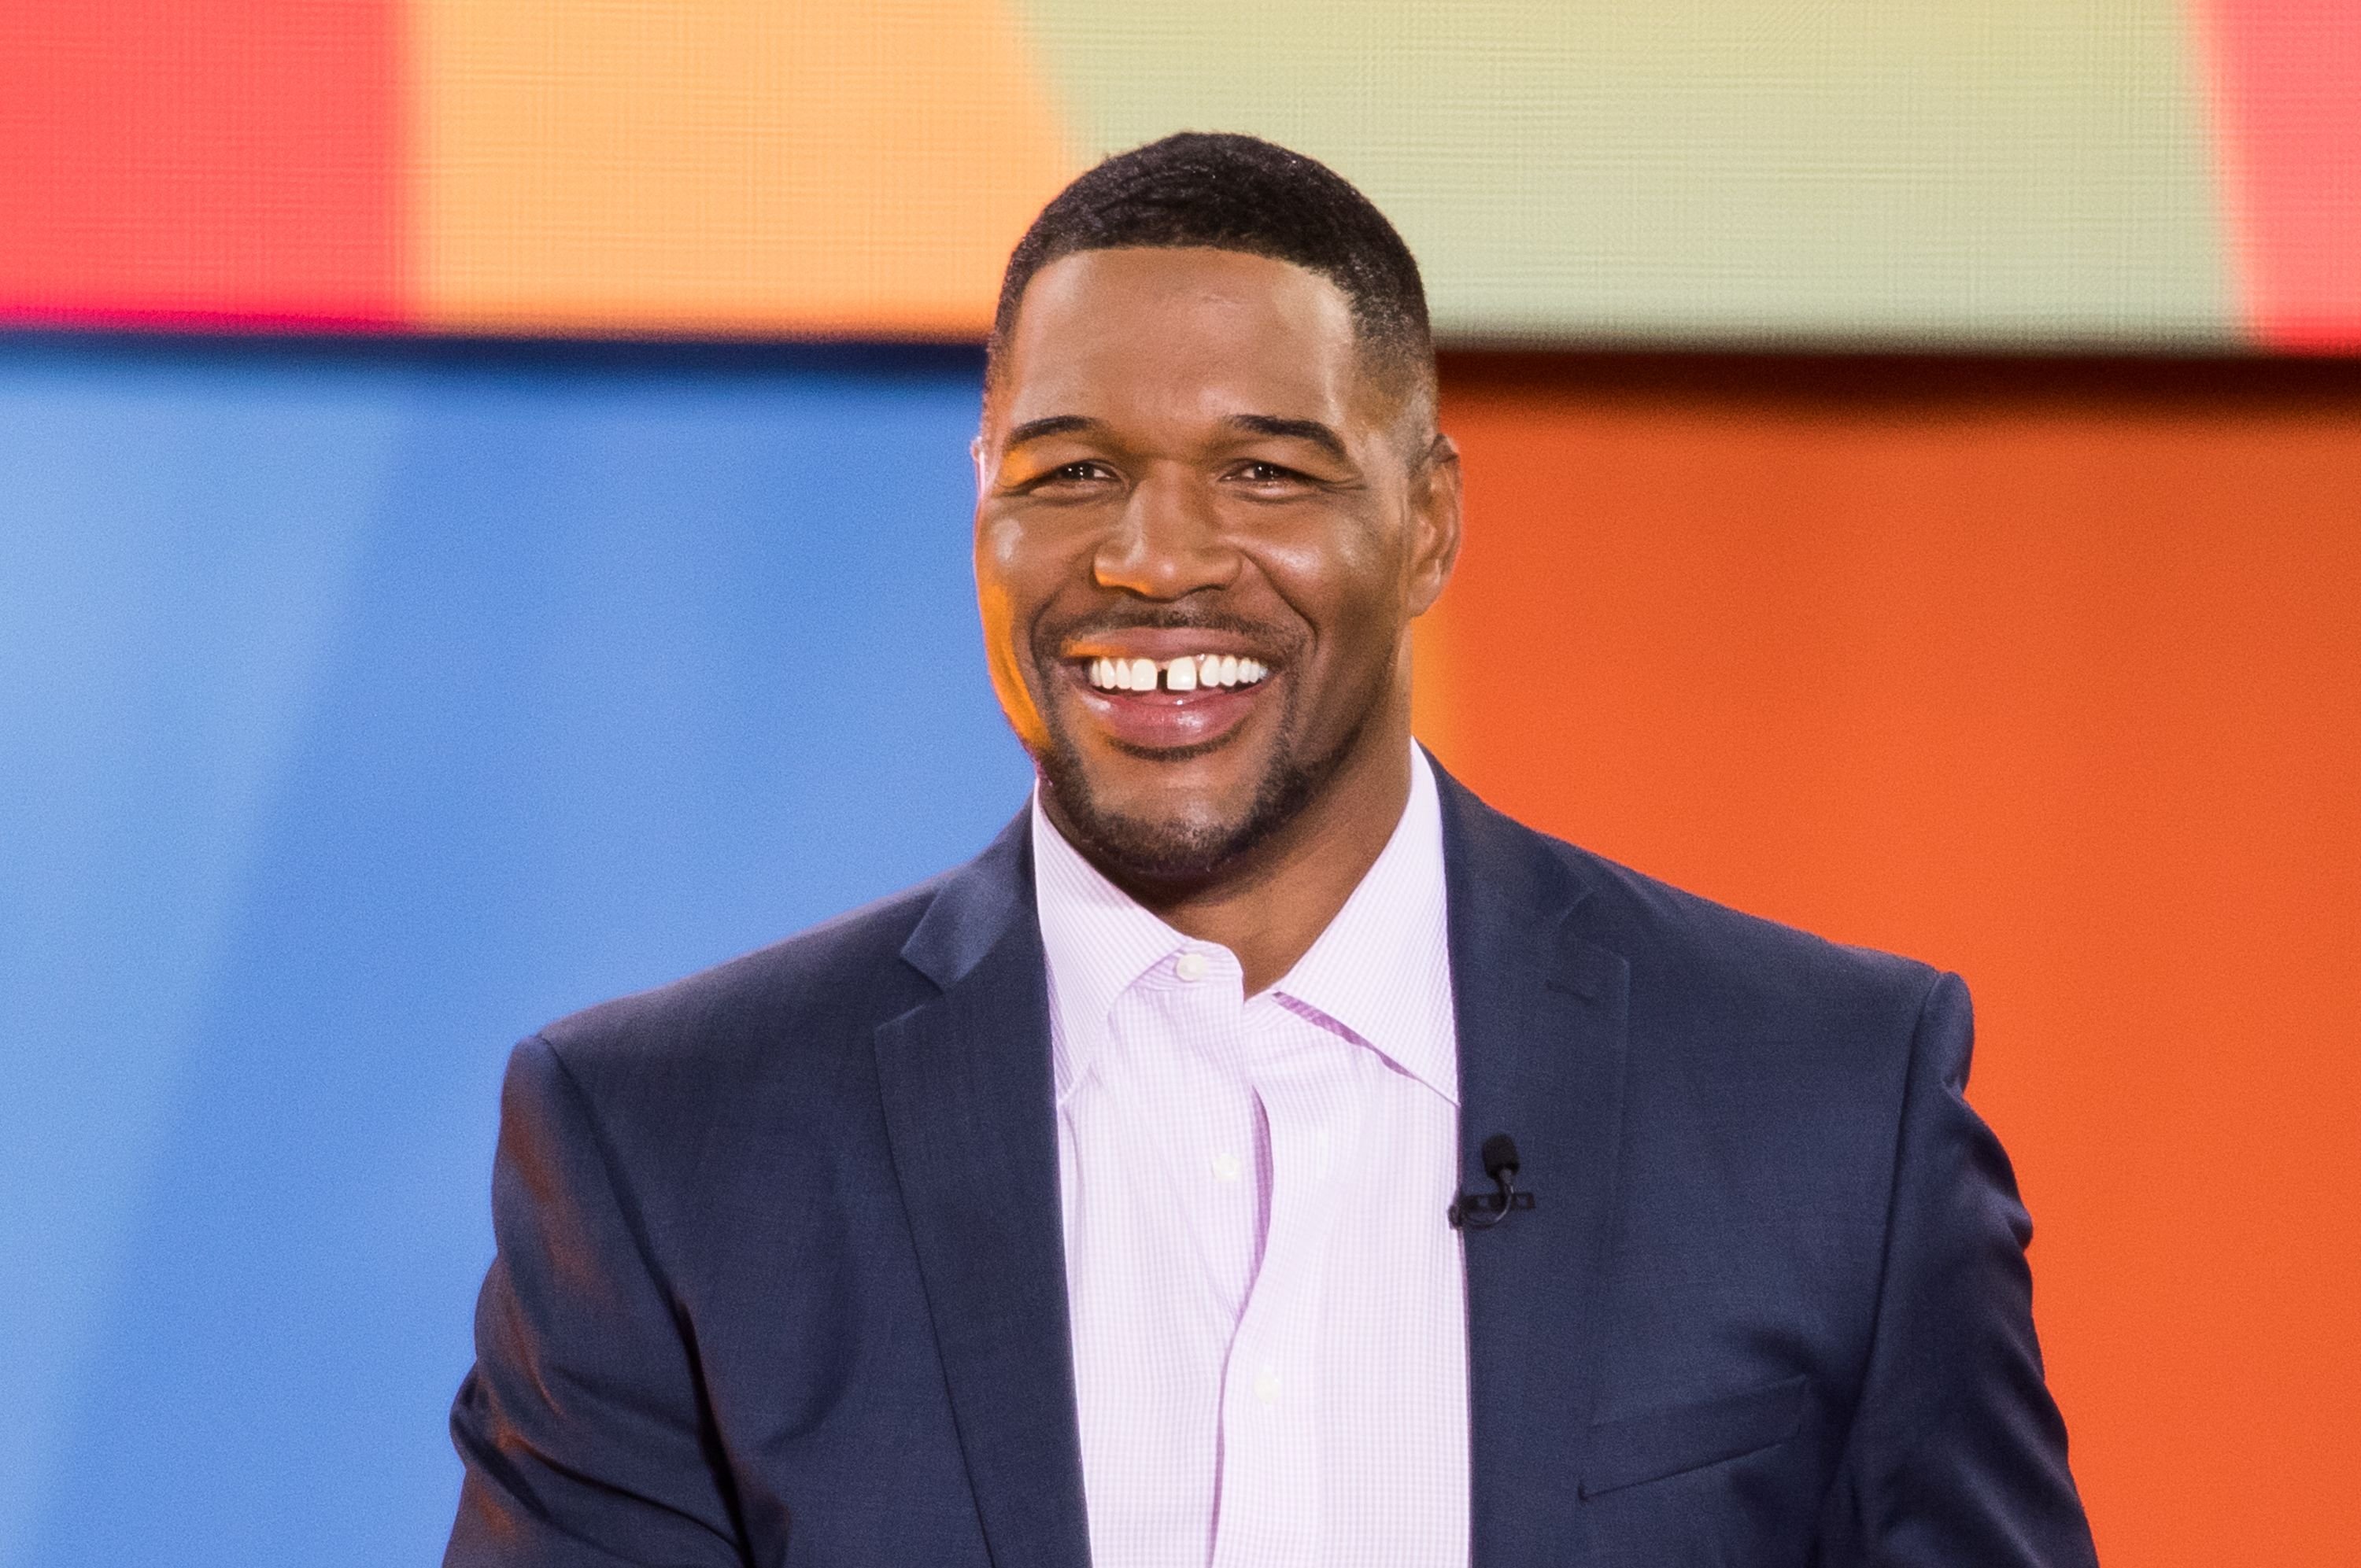 Michael Strahan at ABC's "Good Morning America" at Rumsey Playfield, Central Park on July 6, 2018 in New York City. | Photo: Getty Images